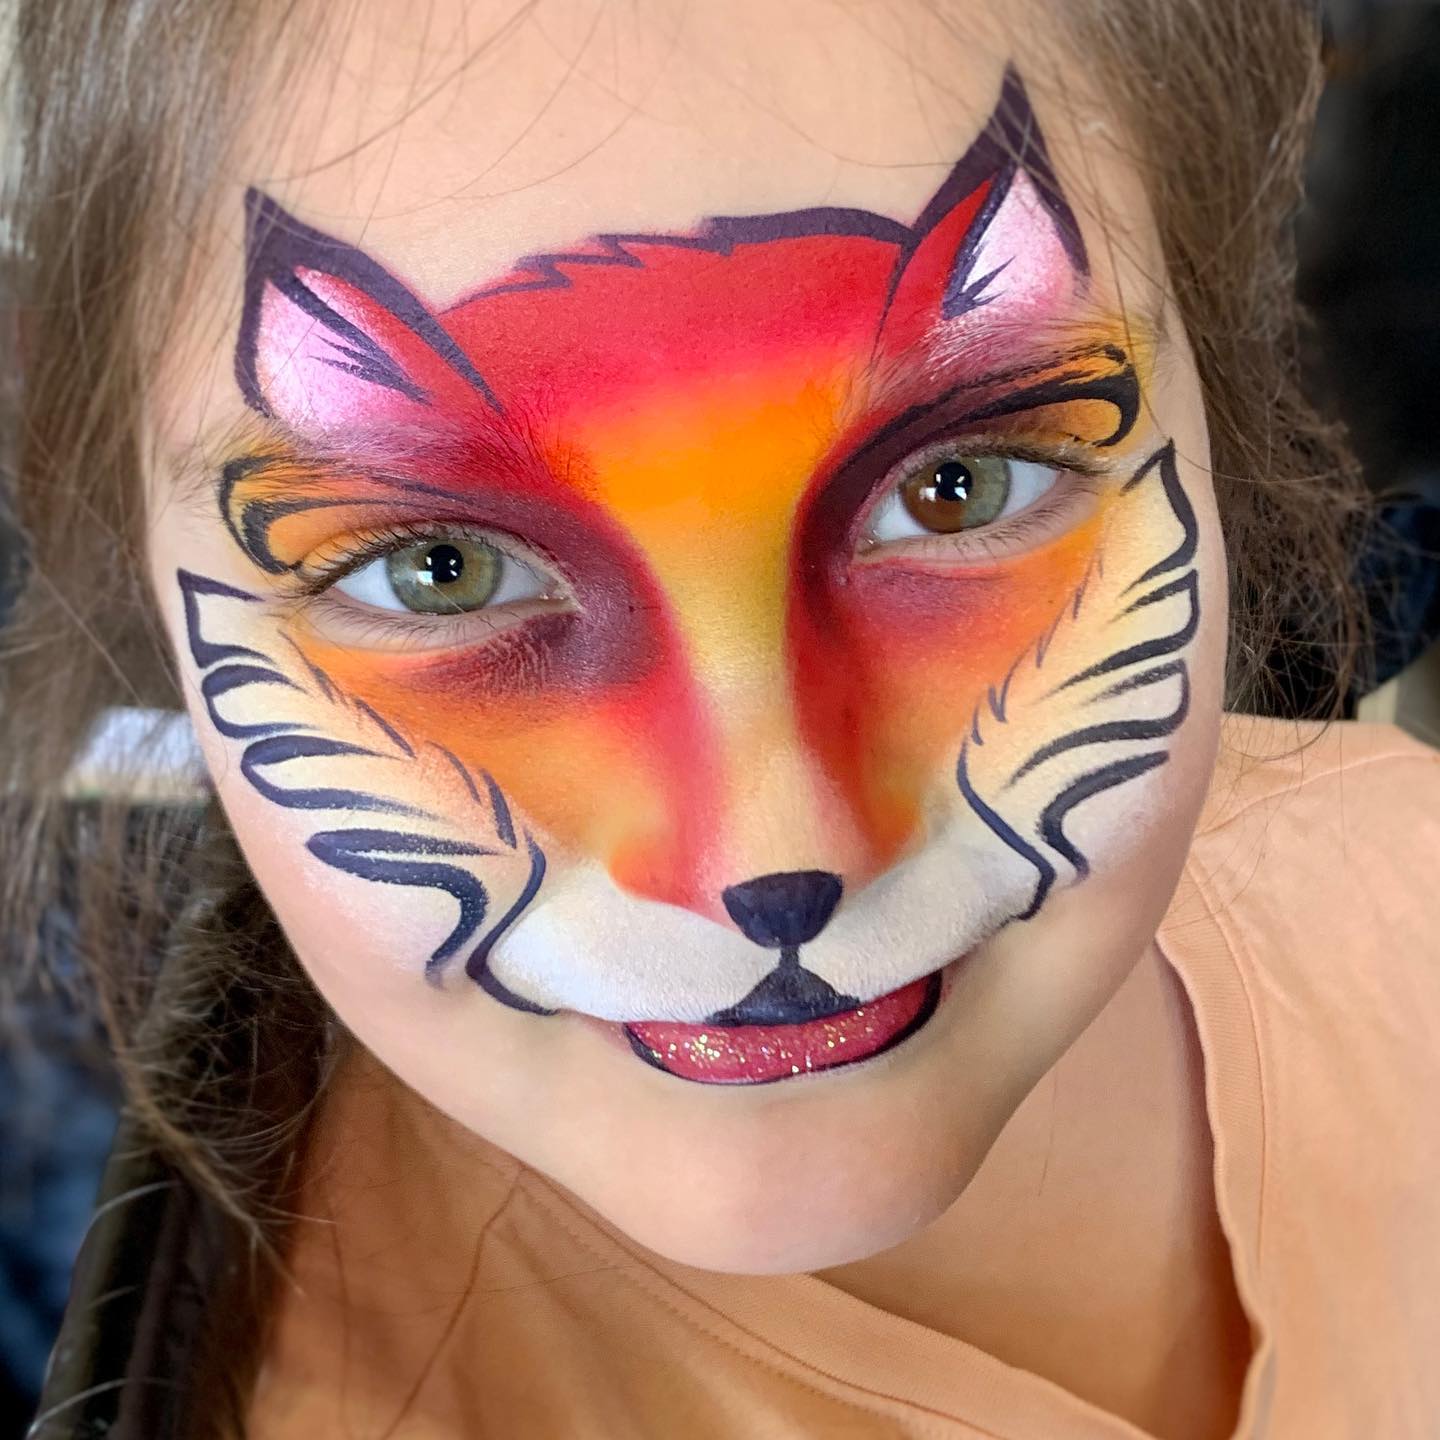 Another funky fox, from our last and possibly busiest day at Kabloom for 2022. Thanks so much to @theartisticdragonfly for having me 😍 #tesselaarkabloom #festivalfacepainting #facepaintingmelbourne #melbournefacepainter #melbournekidsparties #lovemyjob #facepainting #facepainter #facepaintersofinstagram